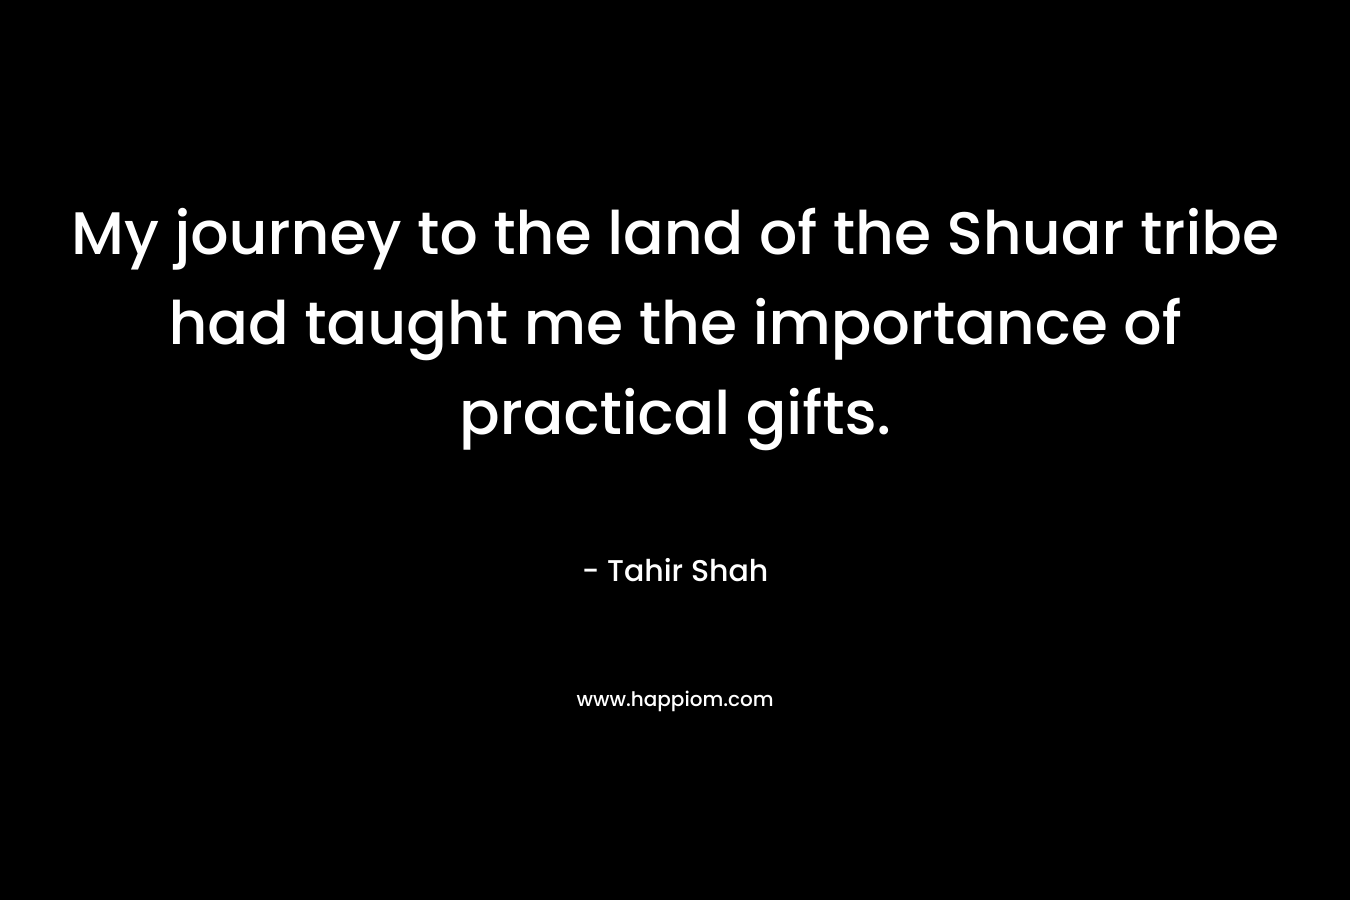 My journey to the land of the Shuar tribe had taught me the importance of practical gifts. – Tahir Shah